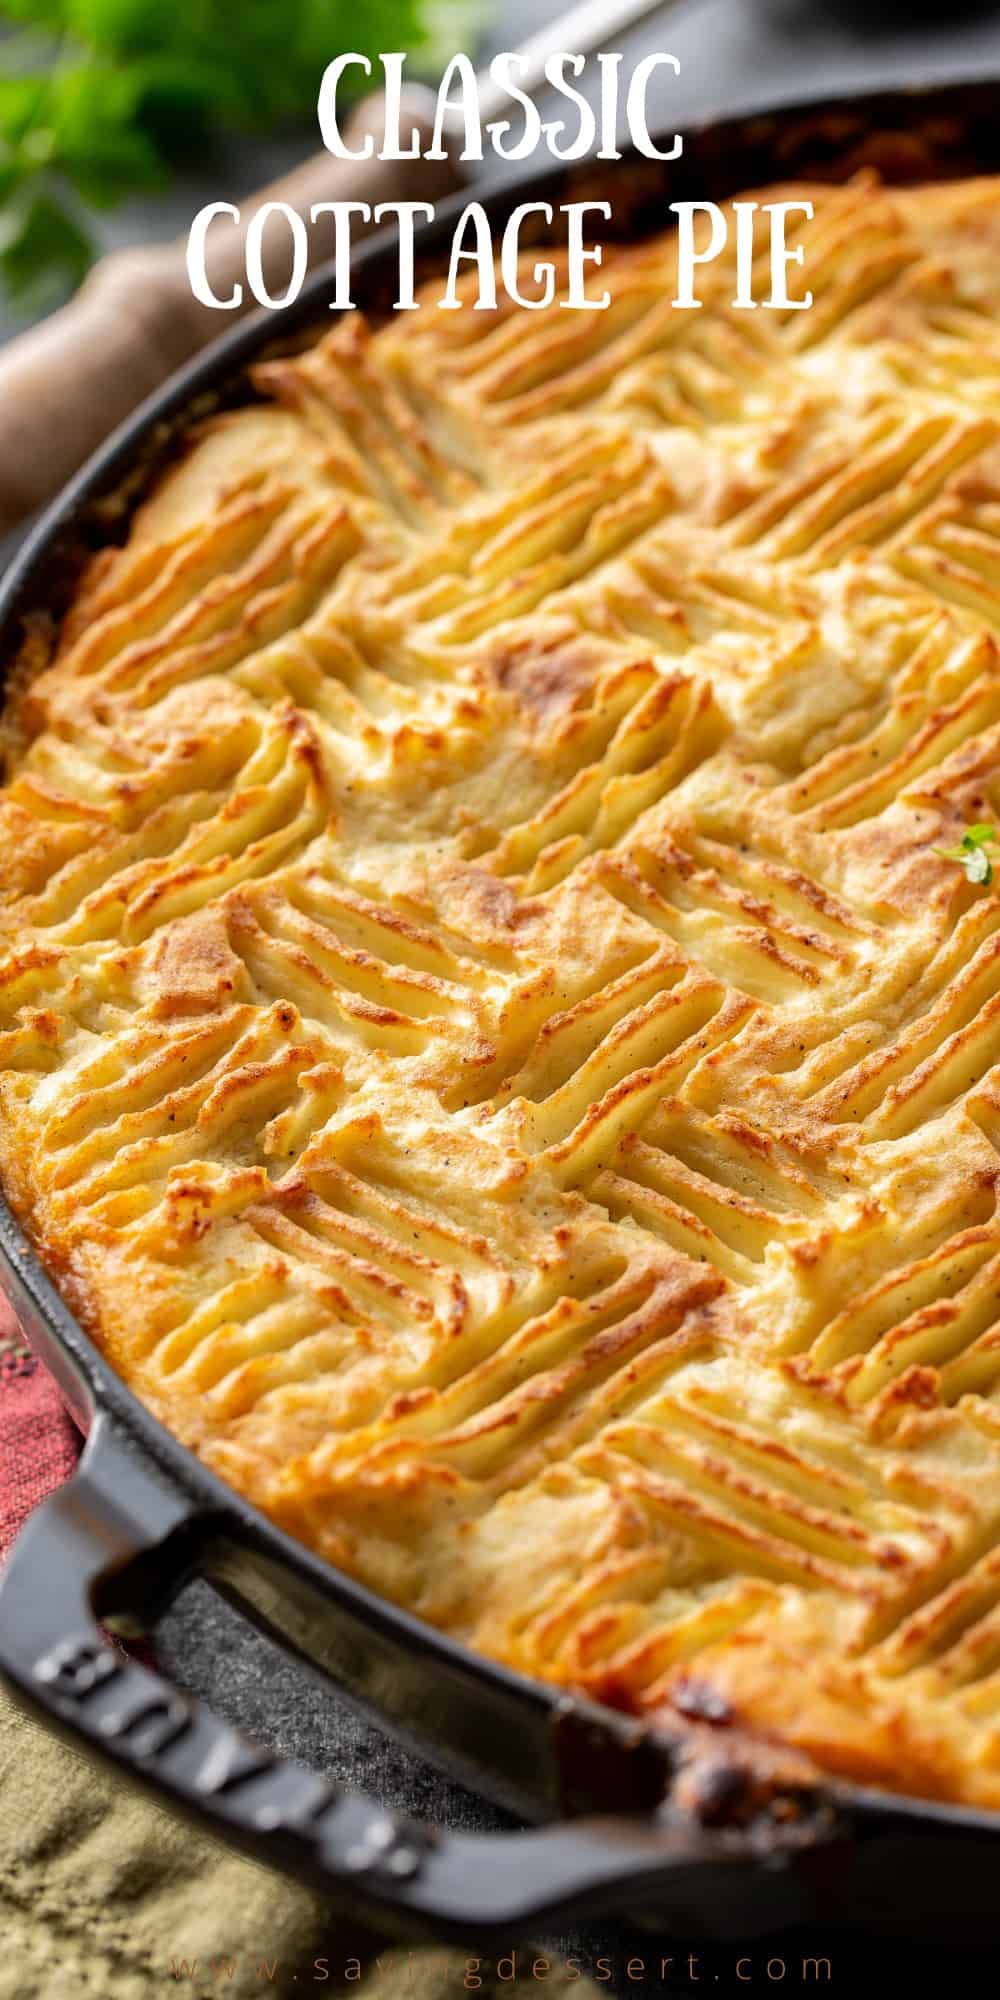 A skillet filled with meaty cottage pie topped with golden brown mashed potatoes